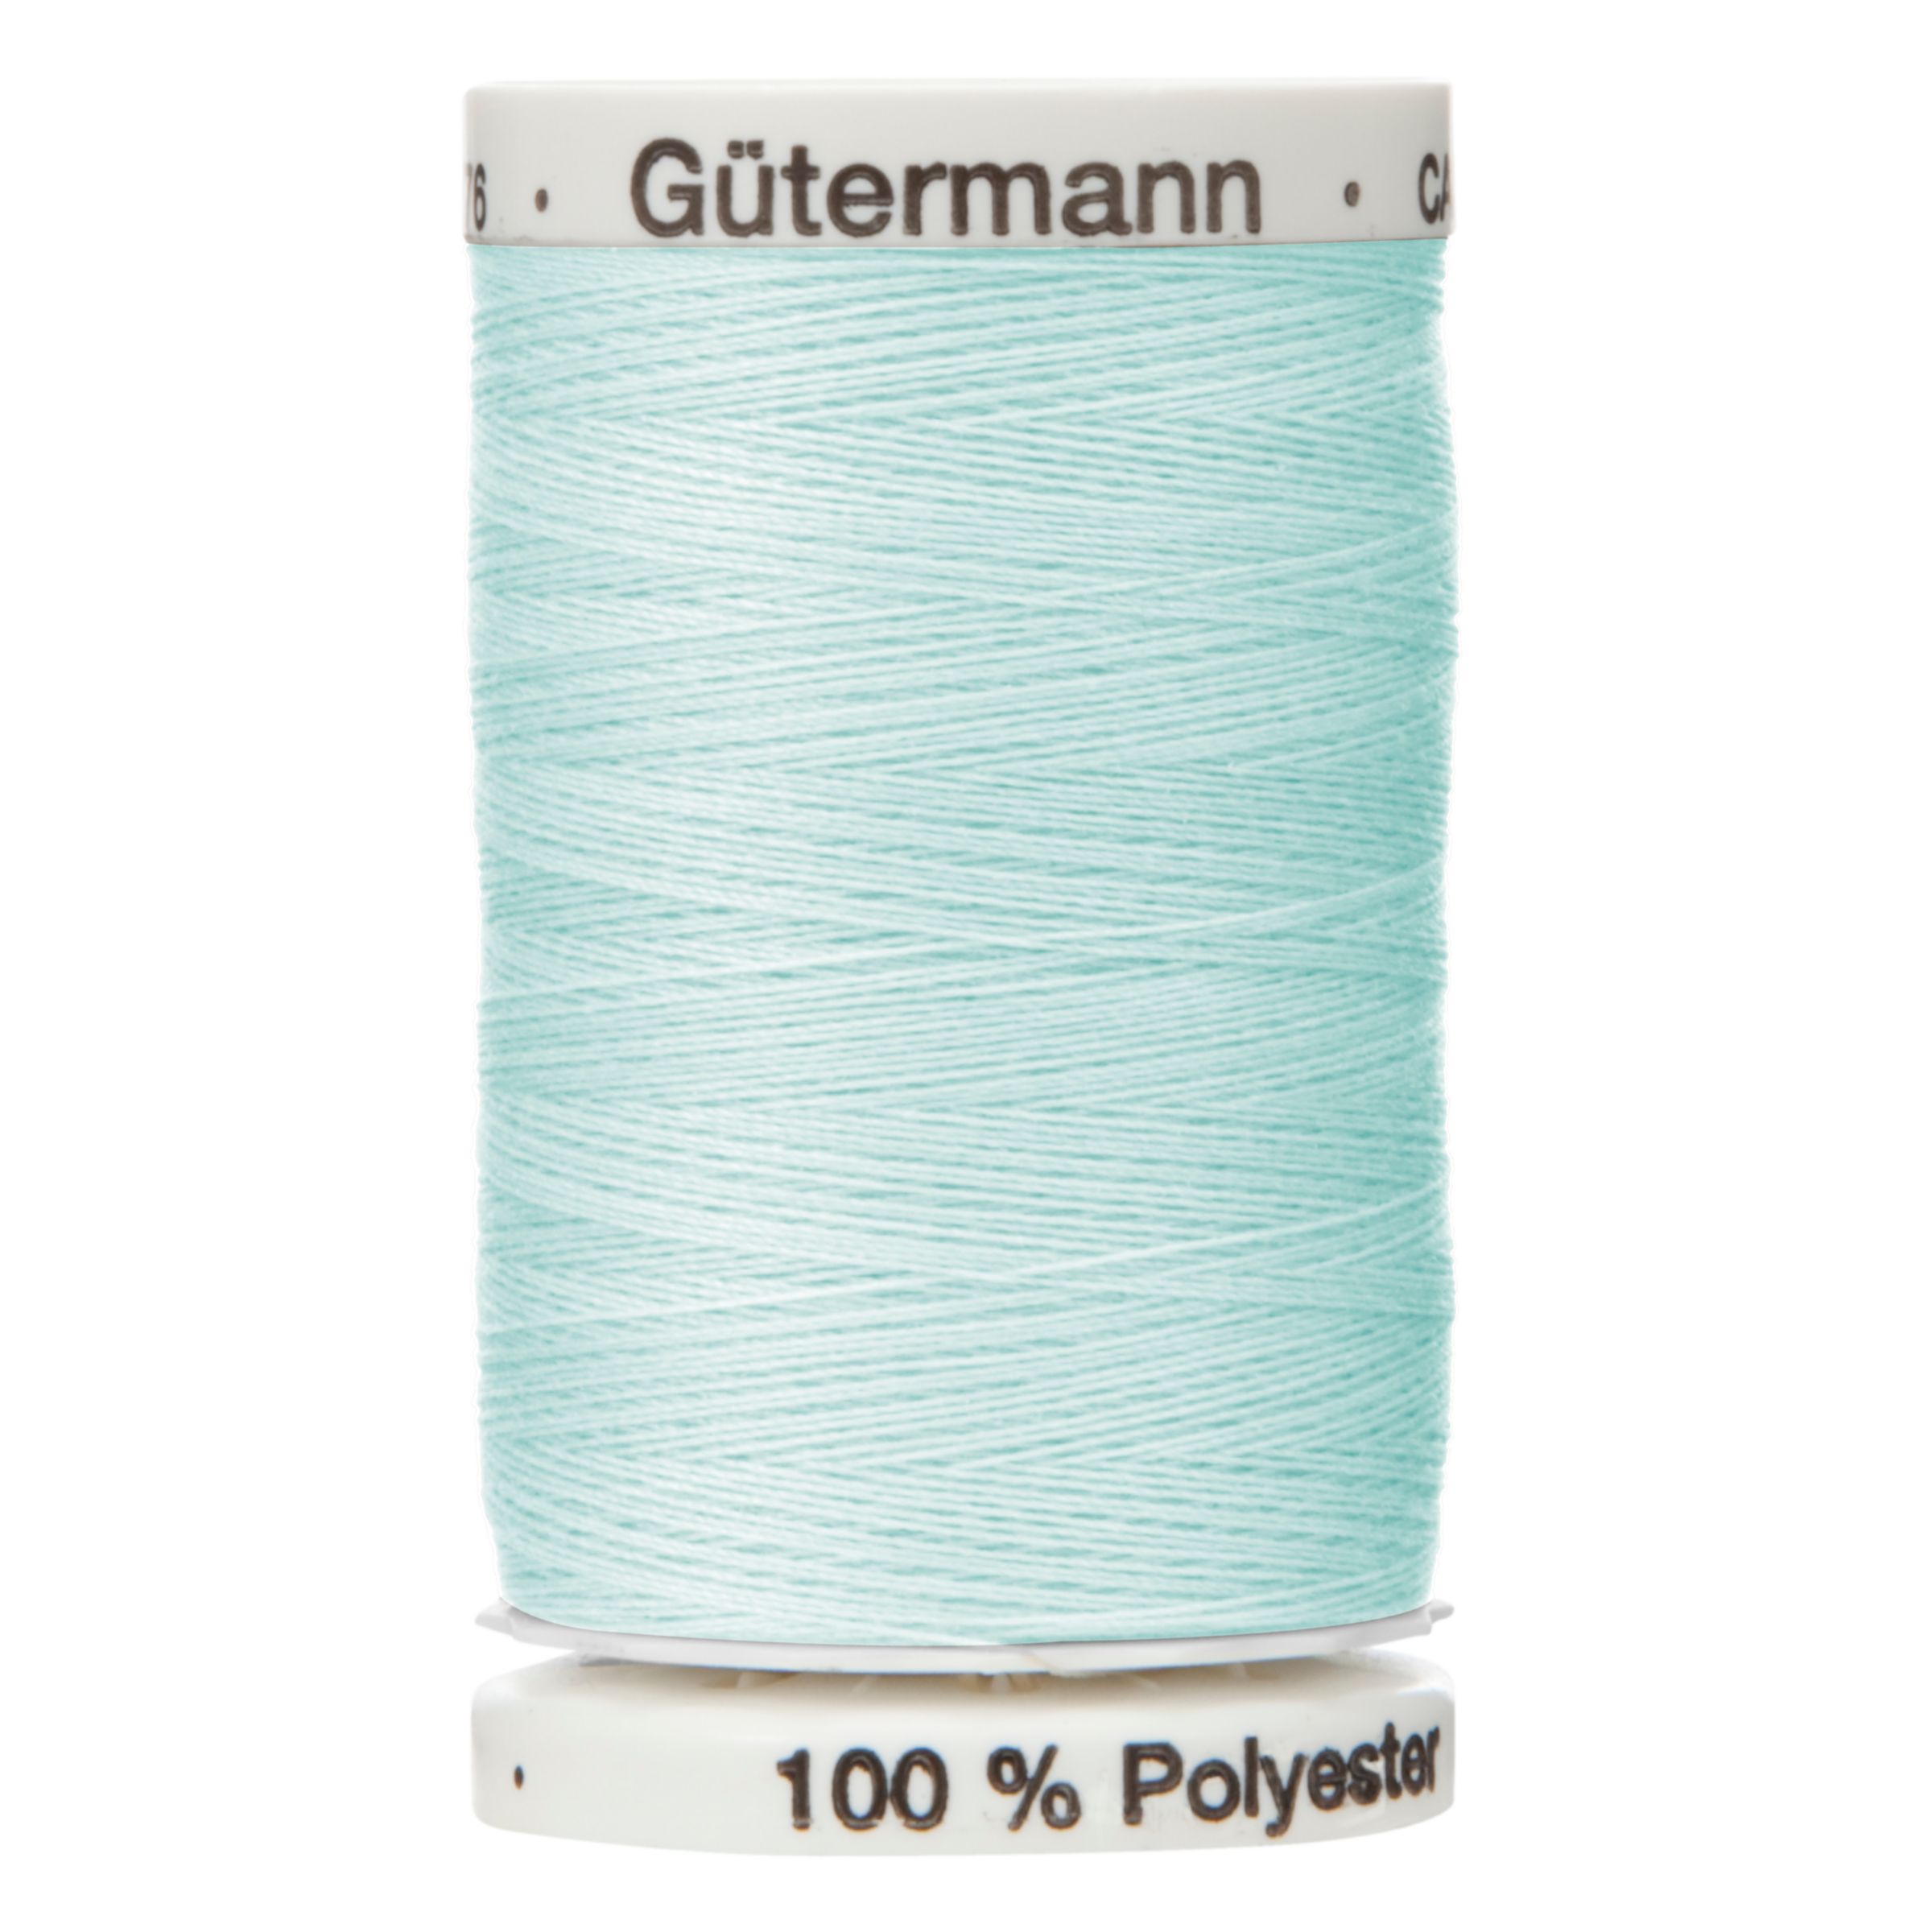 SEWING THREAD Gutermann Sew-all 195 Sky Blue 100m / 100% Polyester 